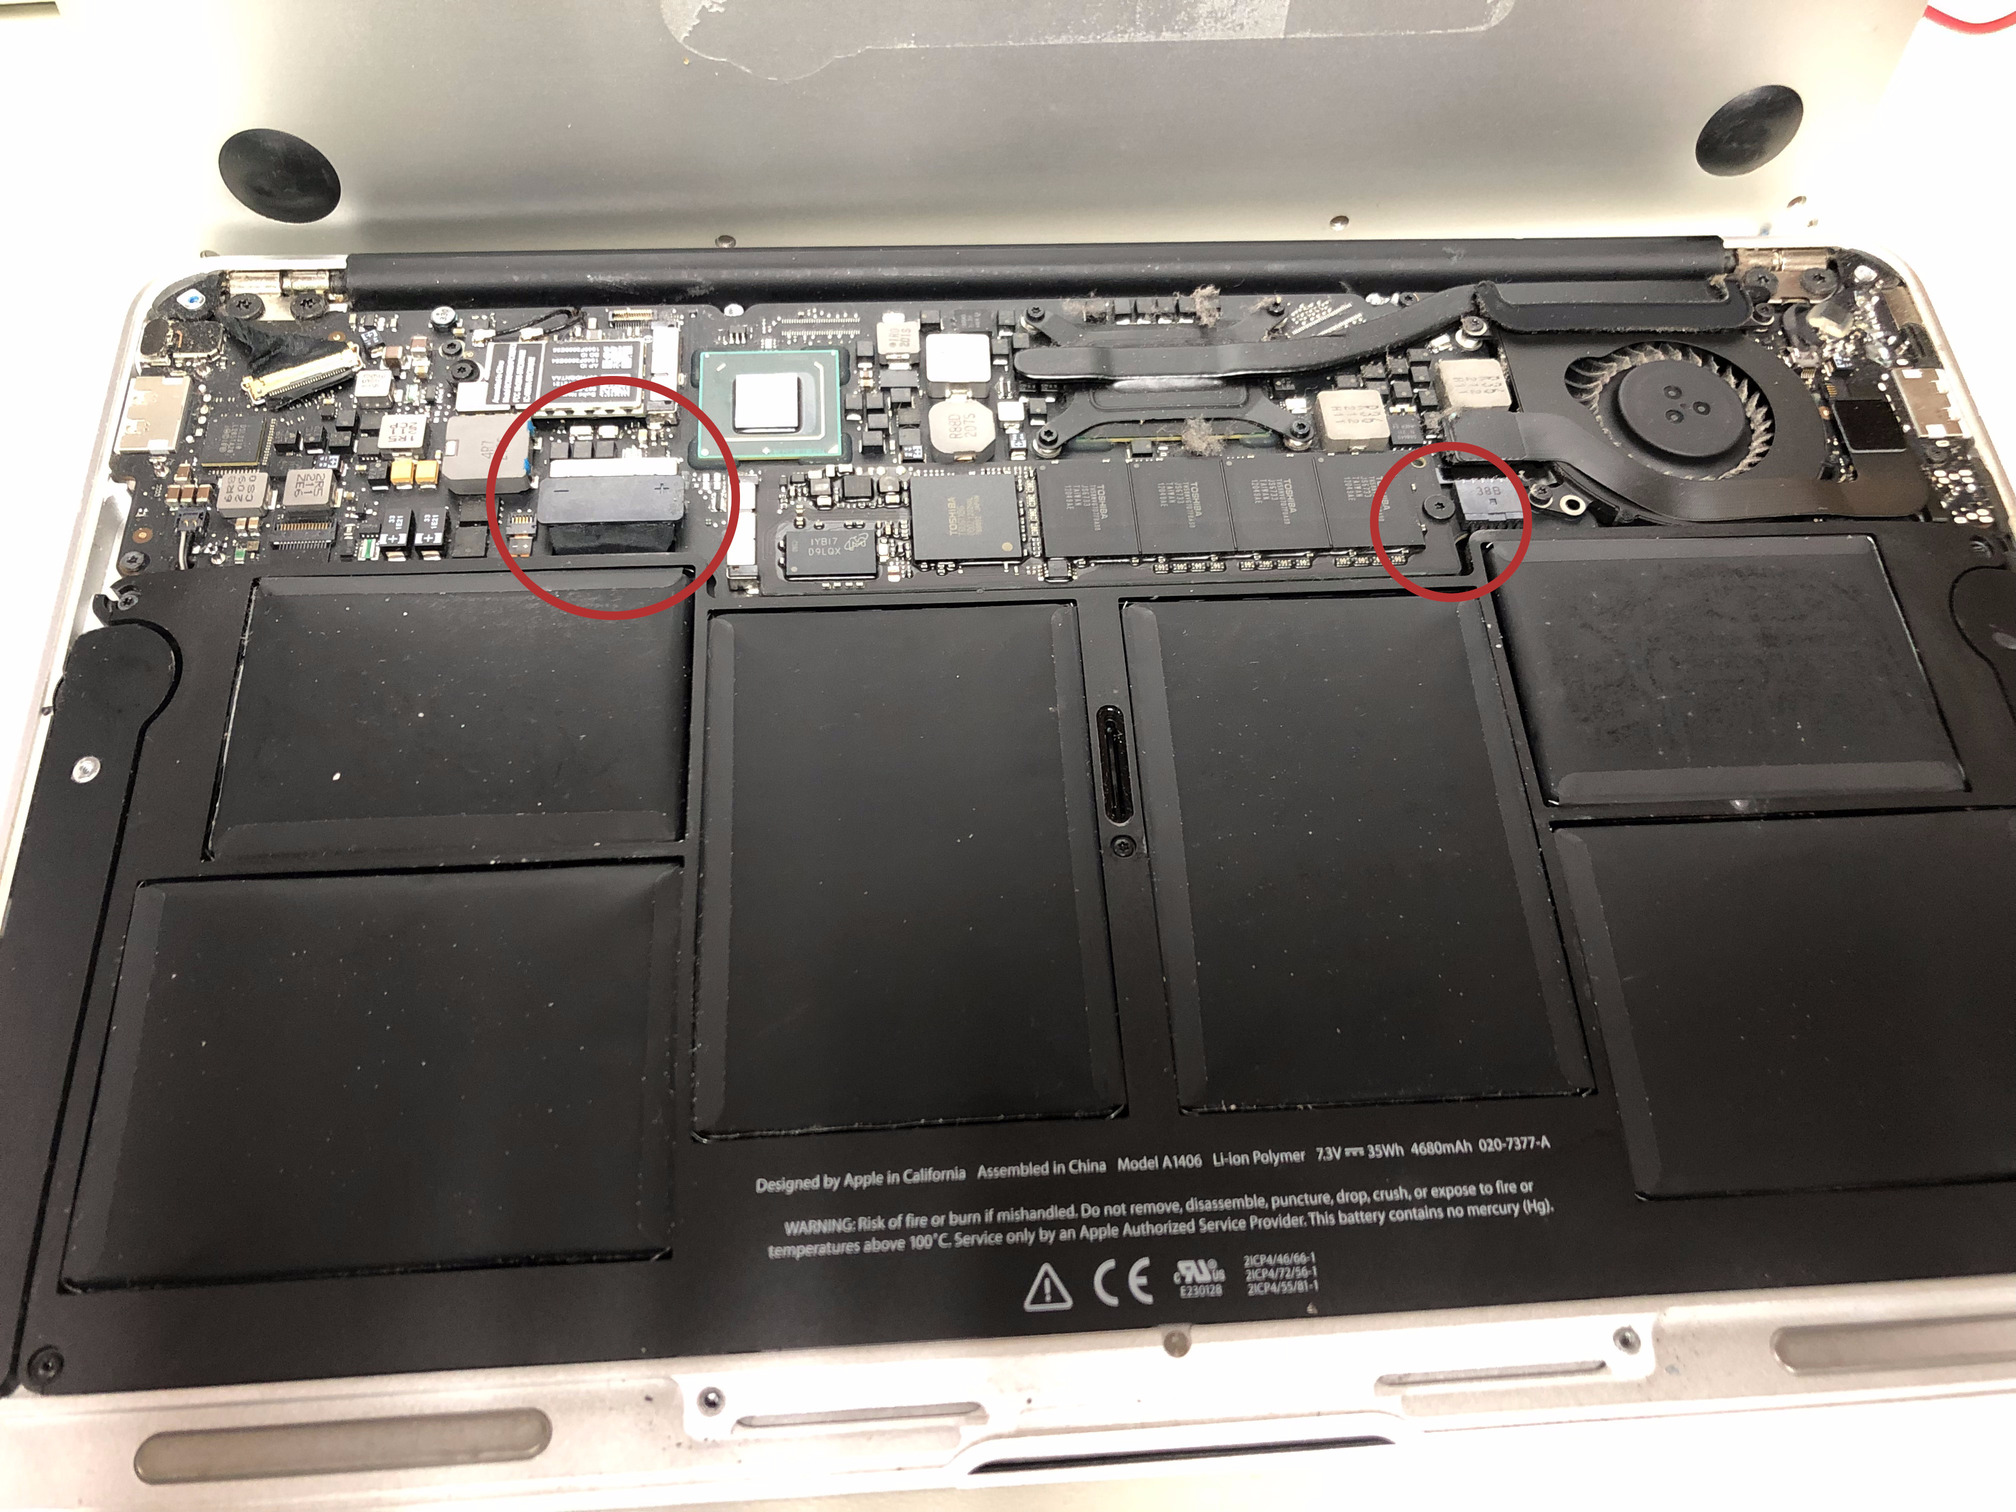 Figure 3a. Locate the battery pack connector and SSD